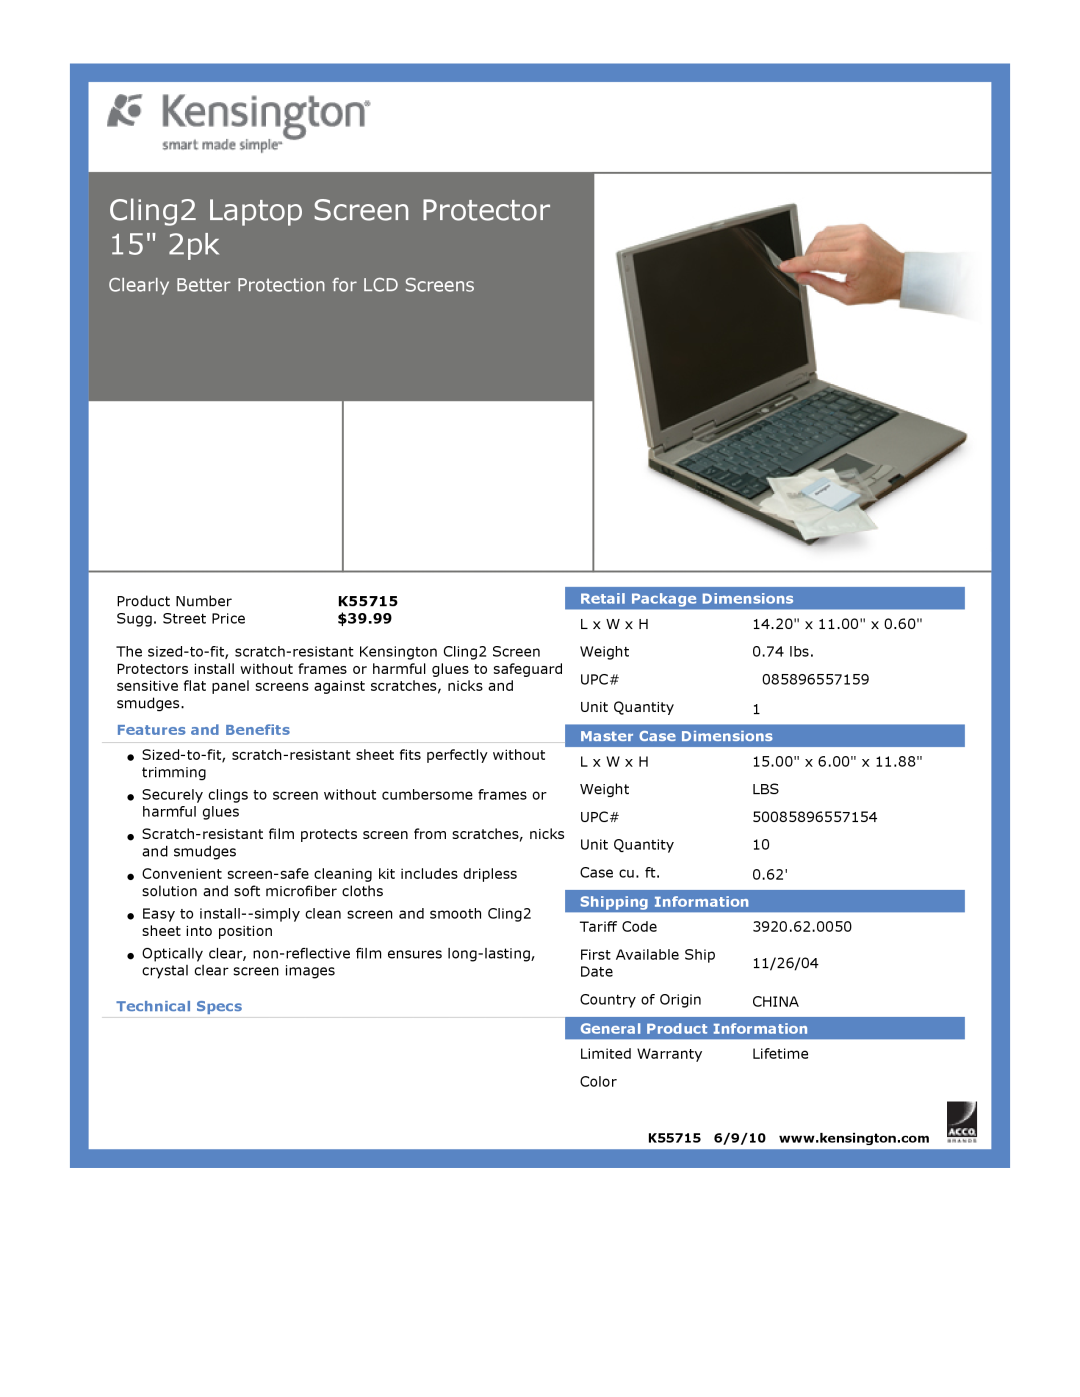 Kensington EU64325 dimensions Cling2 Laptop Screen Protector 15 2pk, Clearly Better Protection for LCD Screens, $39.99 